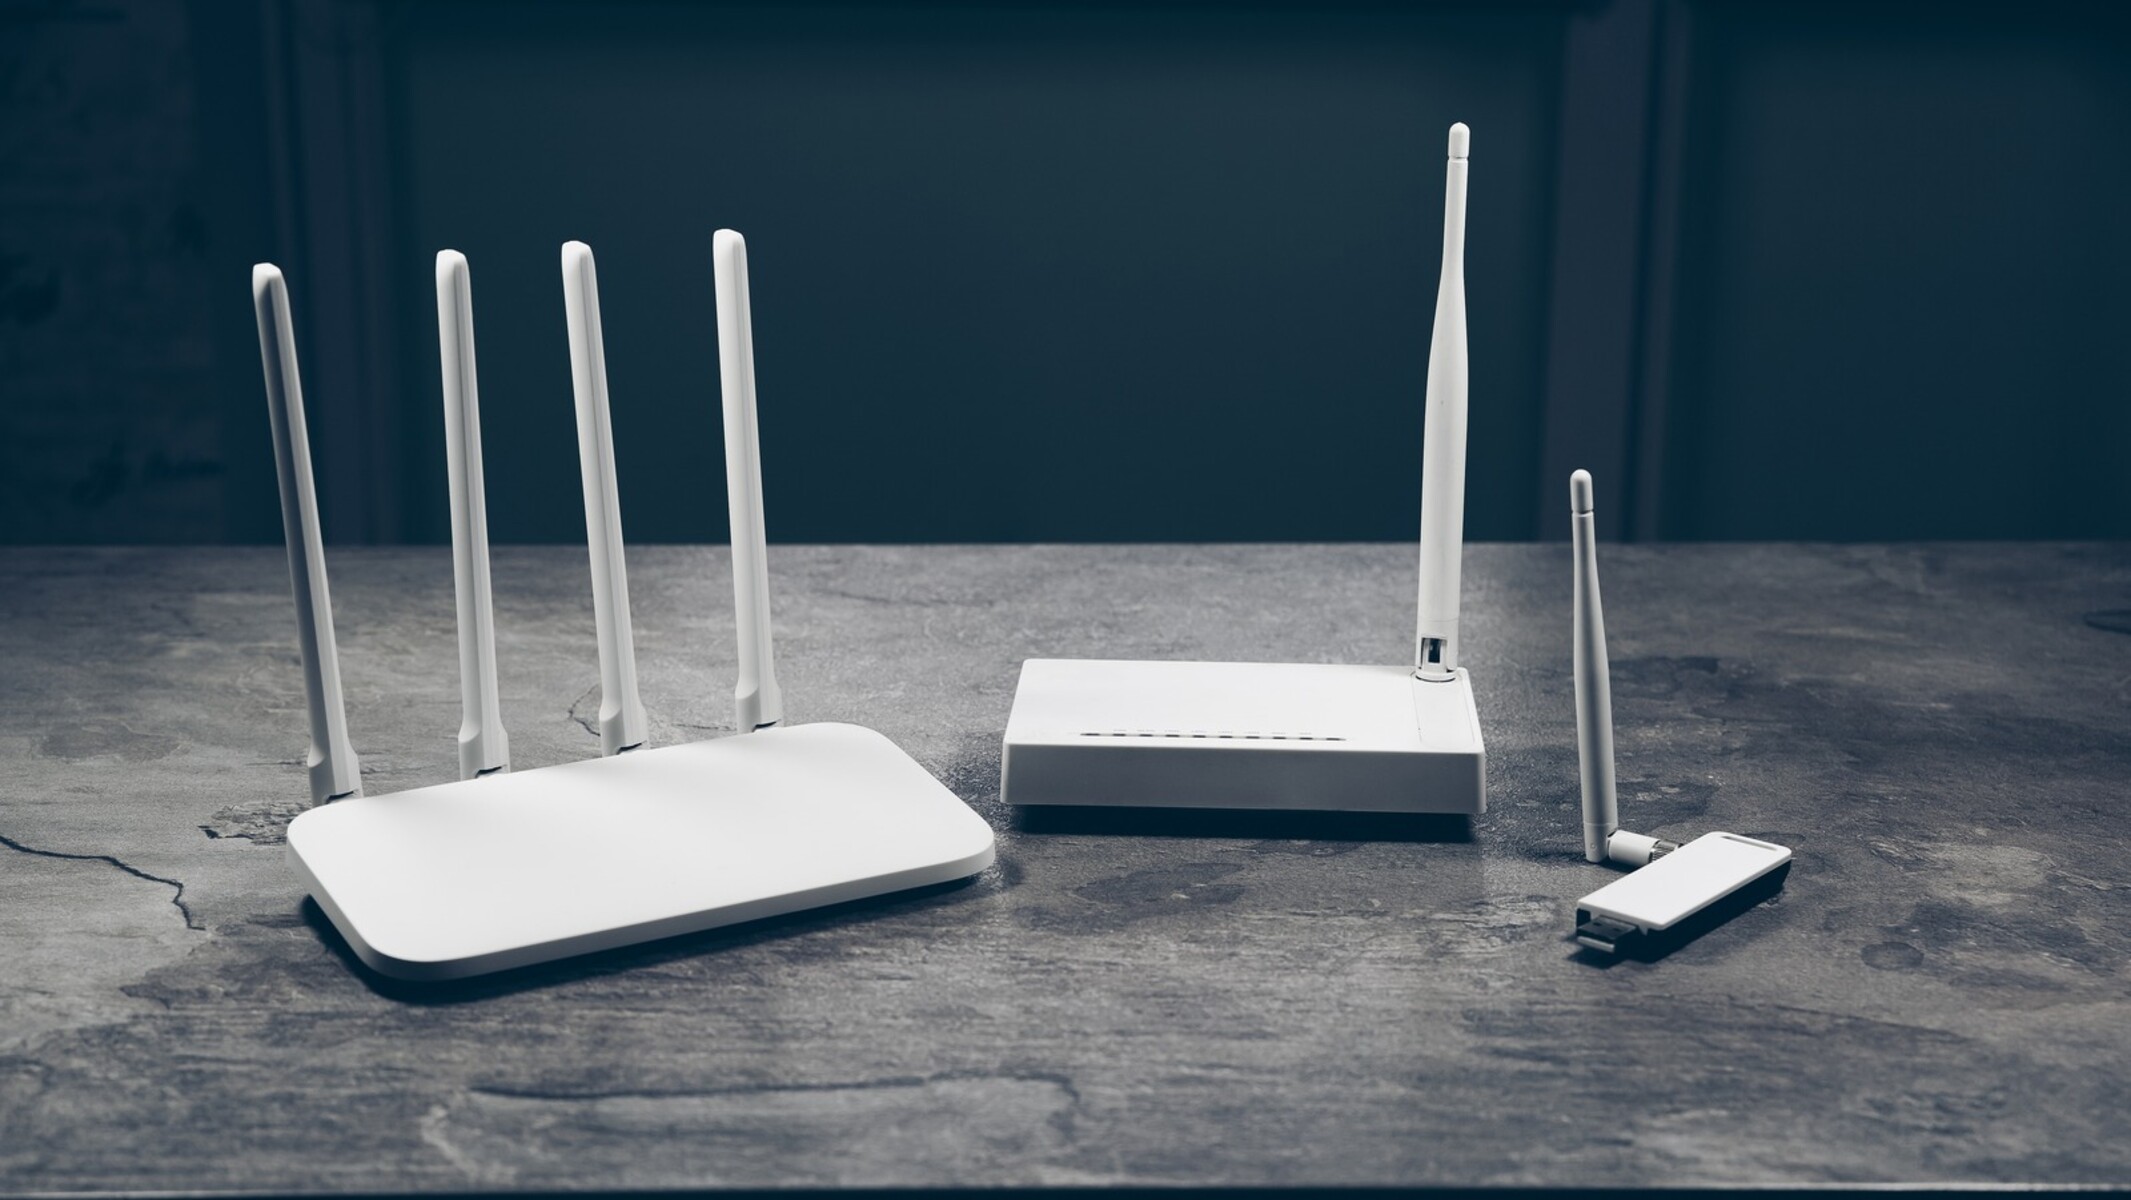 What To Do With An Old Wireless Router